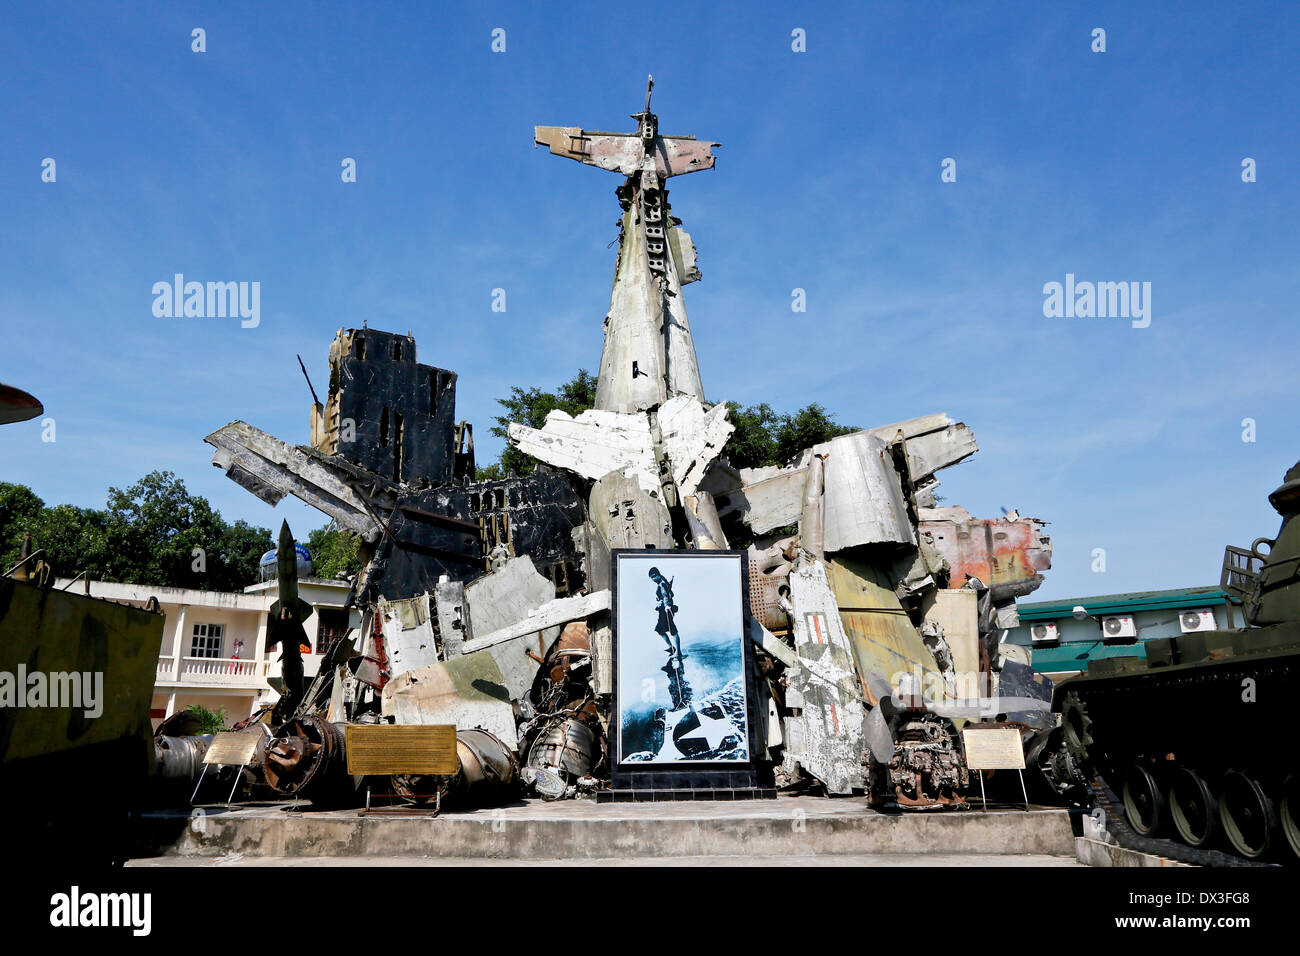 The wreckage of captured American planes at the Vietnam military history Museum,  Hanoi, Vietnam, South East Asia Stock Photo